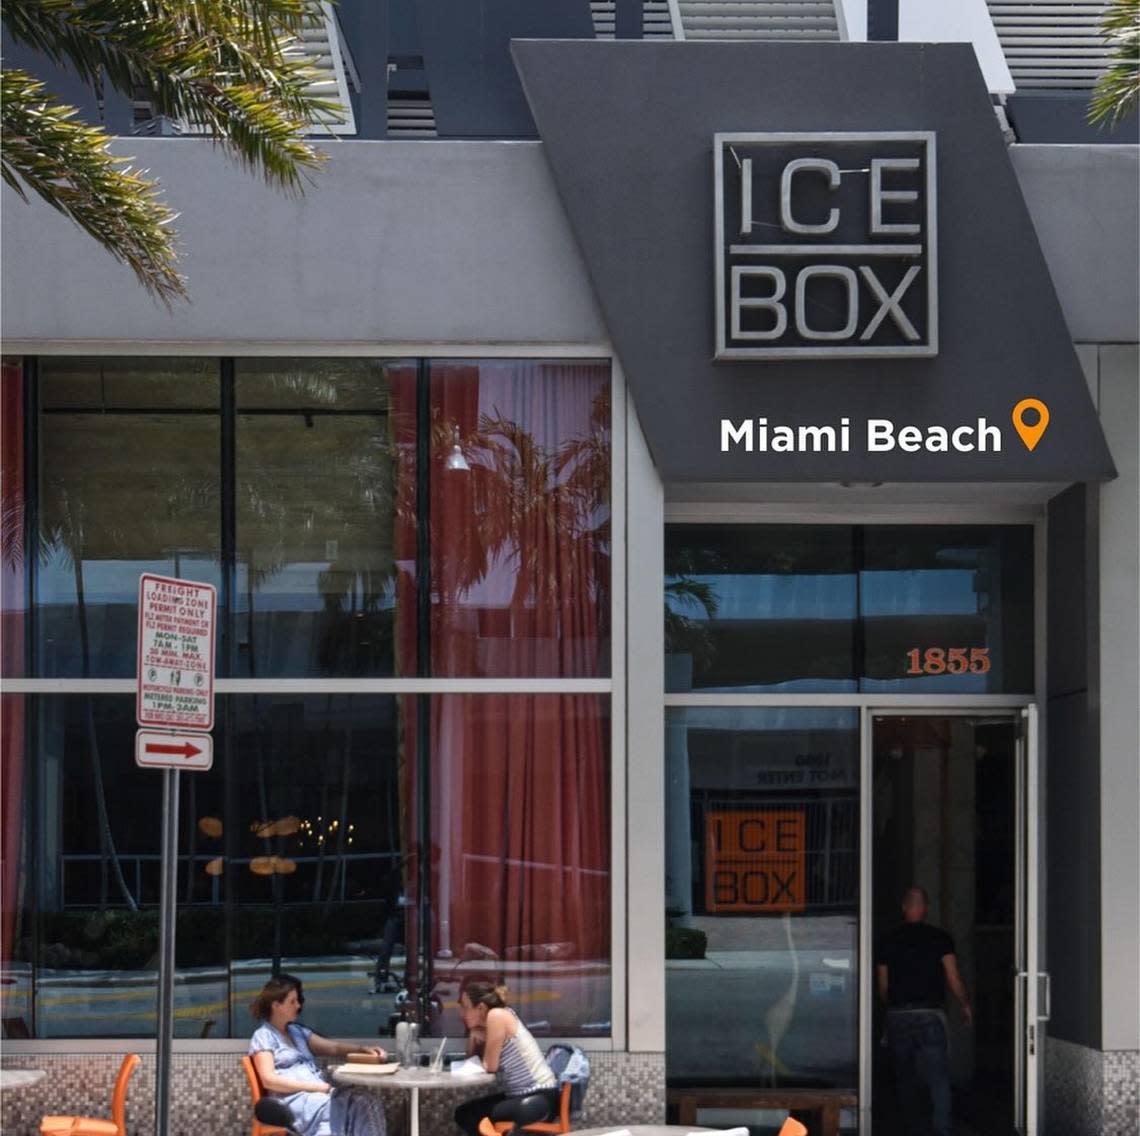 The Ice Box Cafe in Miami Beach has closed; the Hallandale Beach location is also closed.